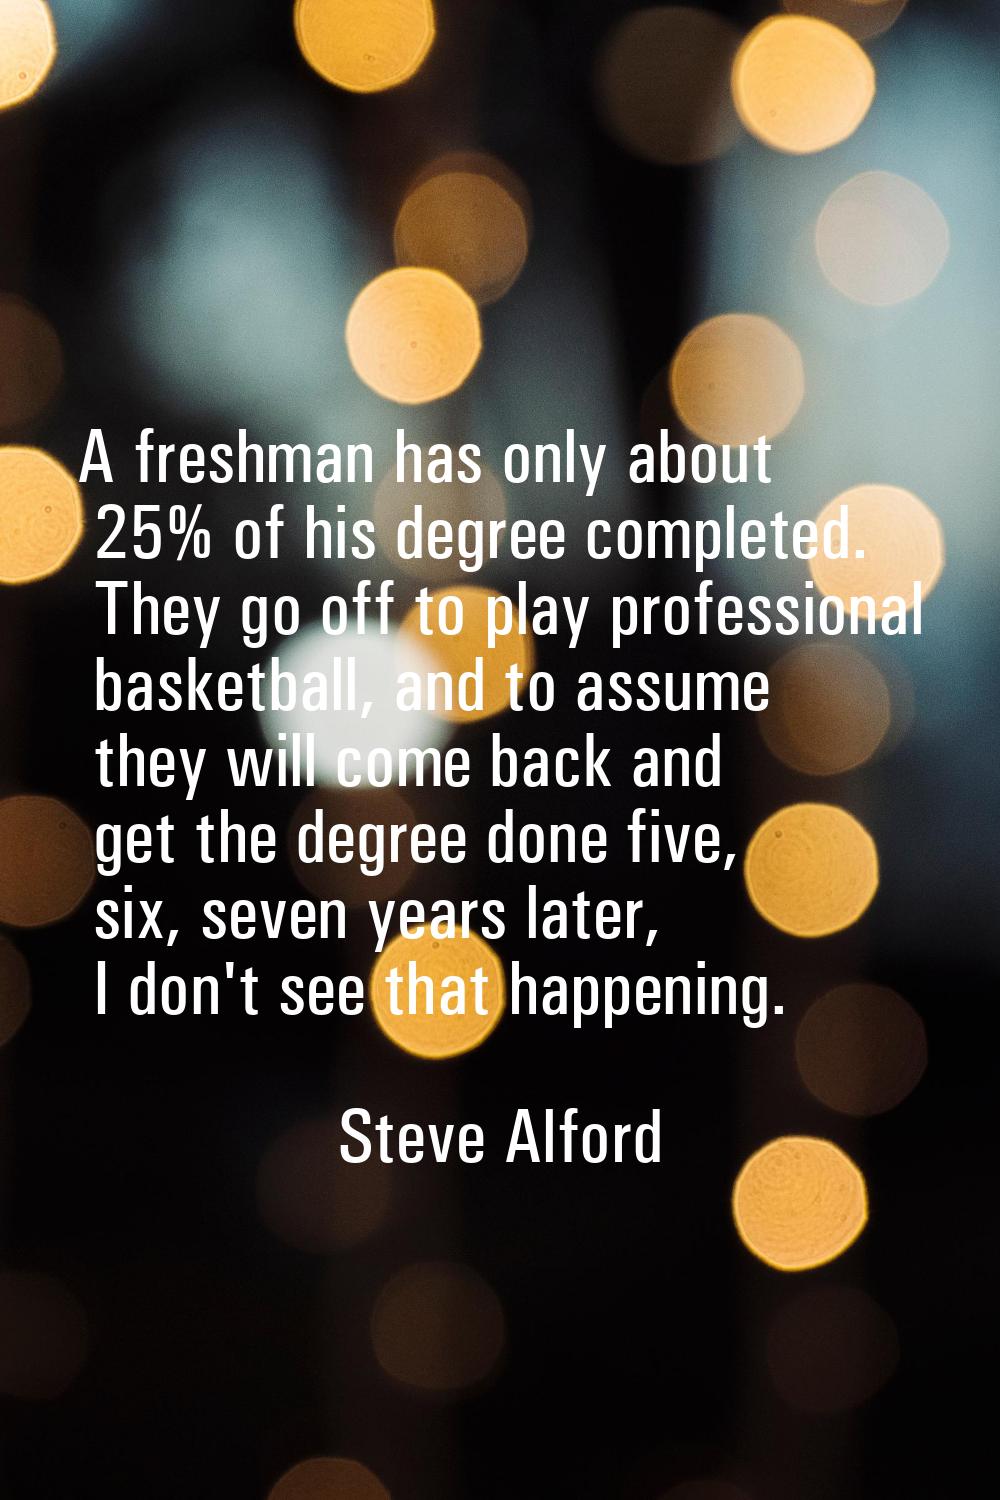 A freshman has only about 25% of his degree completed. They go off to play professional basketball,